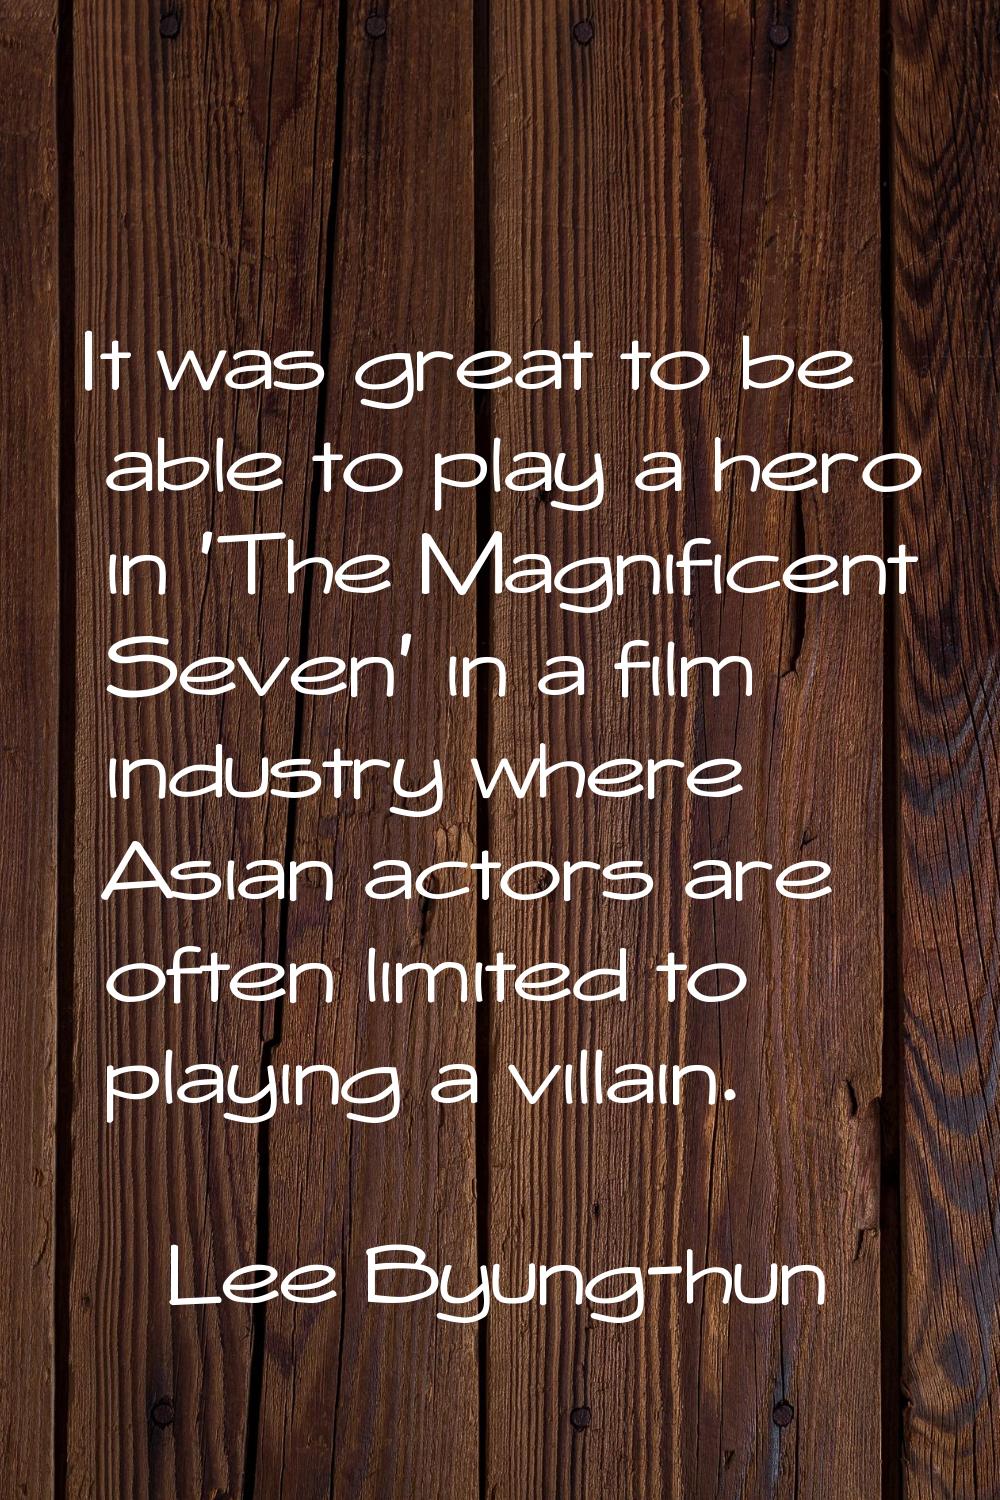 It was great to be able to play a hero in 'The Magnificent Seven' in a film industry where Asian ac